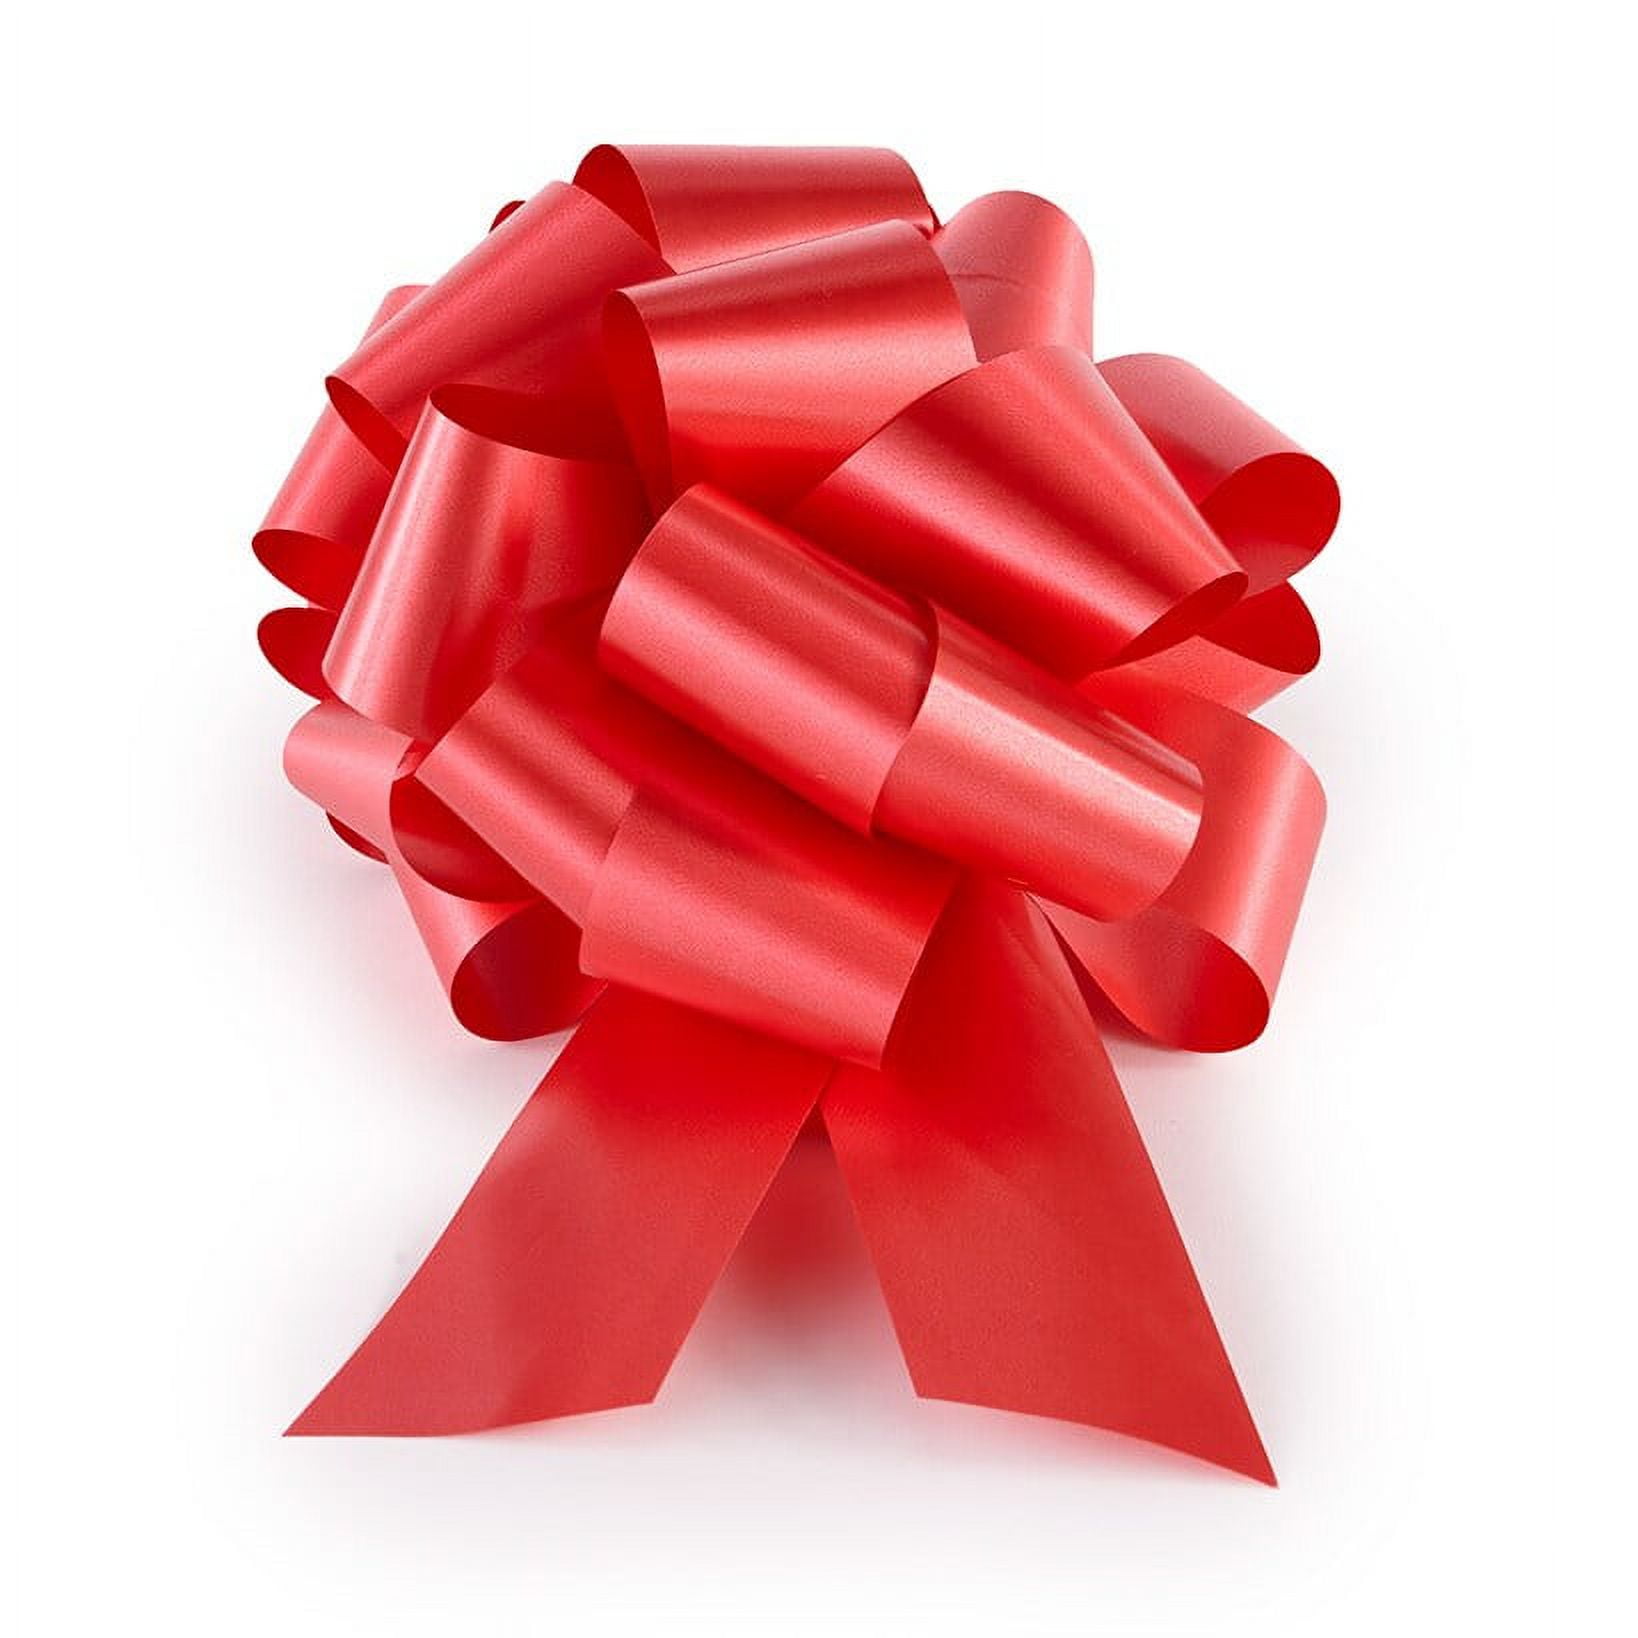 Christmas Present Bow - Oversized Red Ribbon for Large Gifts - 9